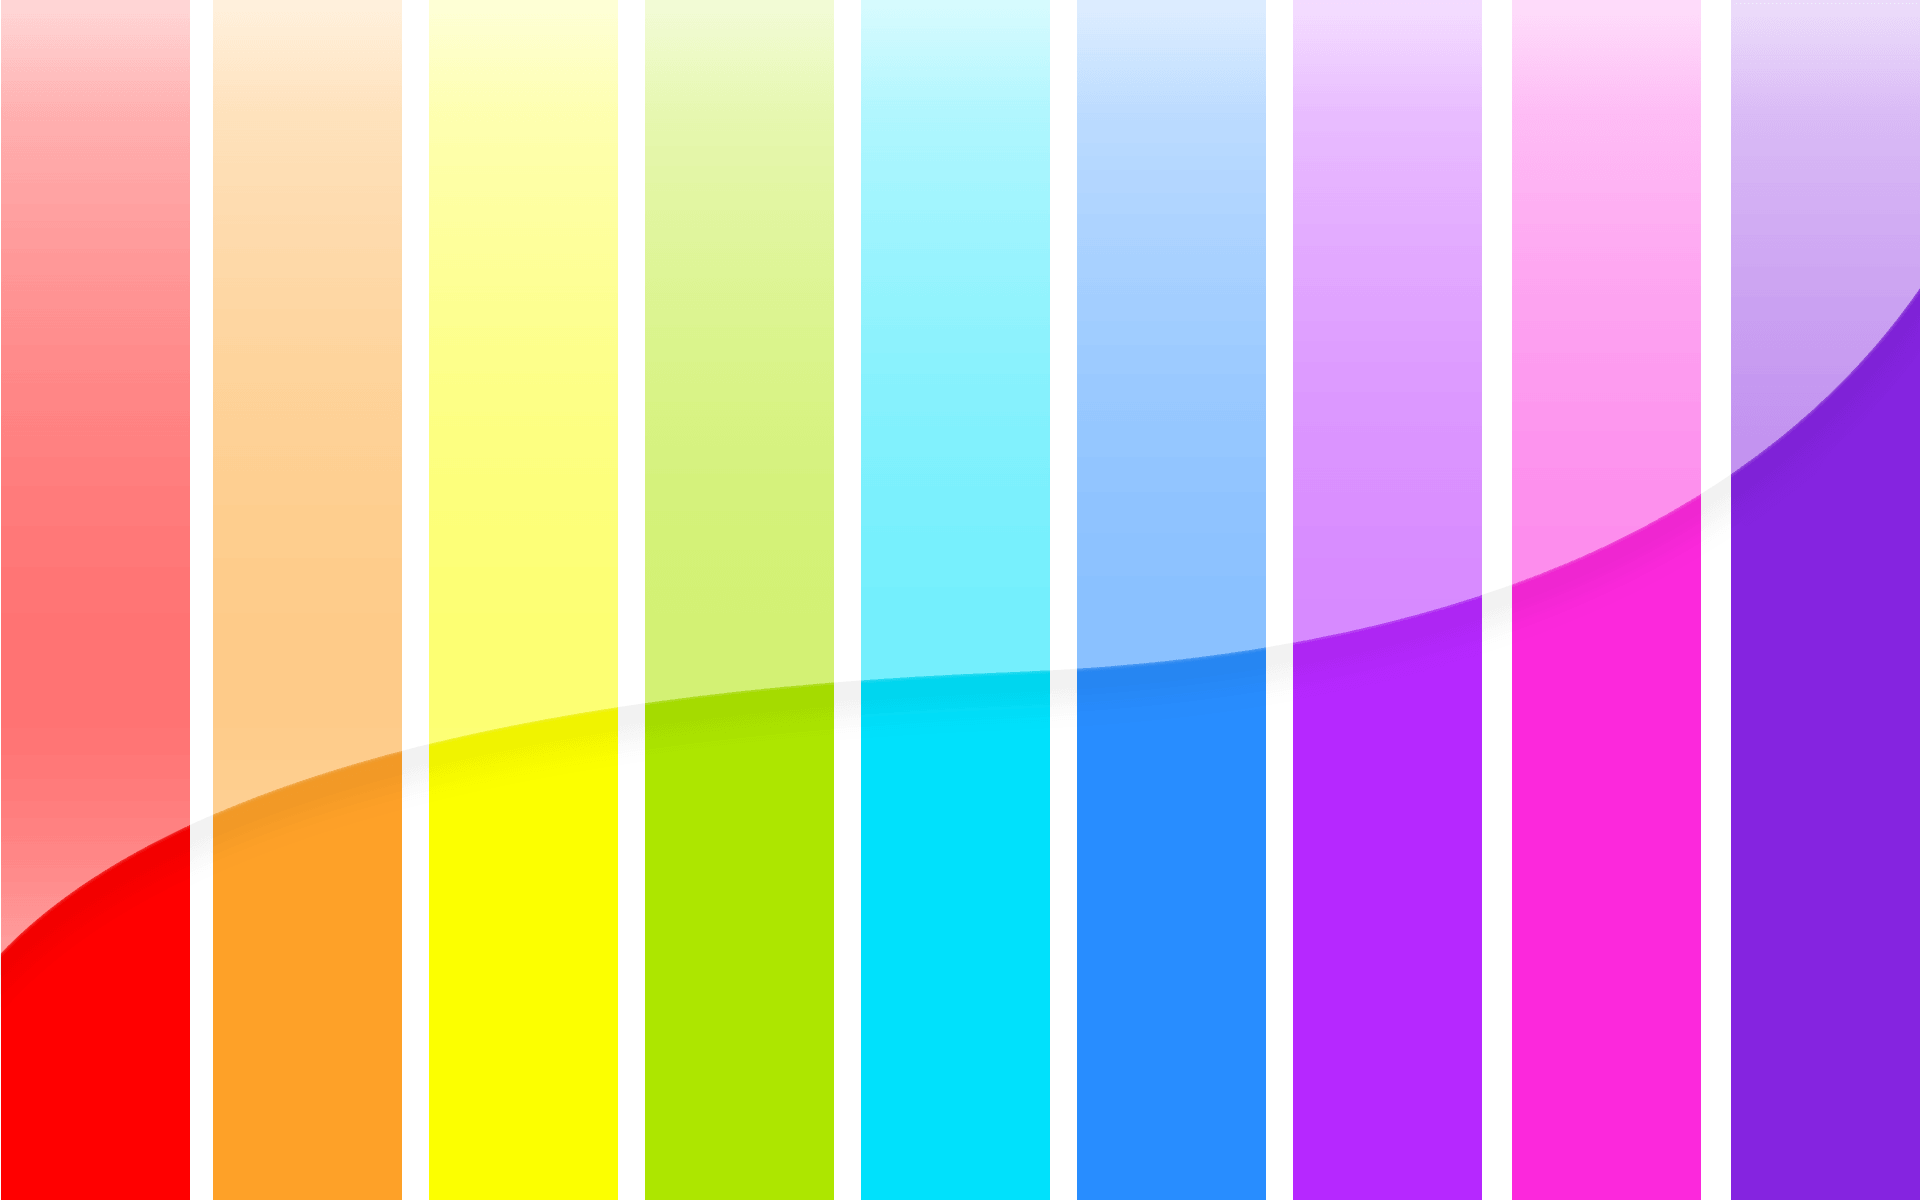 HD Quality Wallpaper: Striped Image For Desktop, Free Download